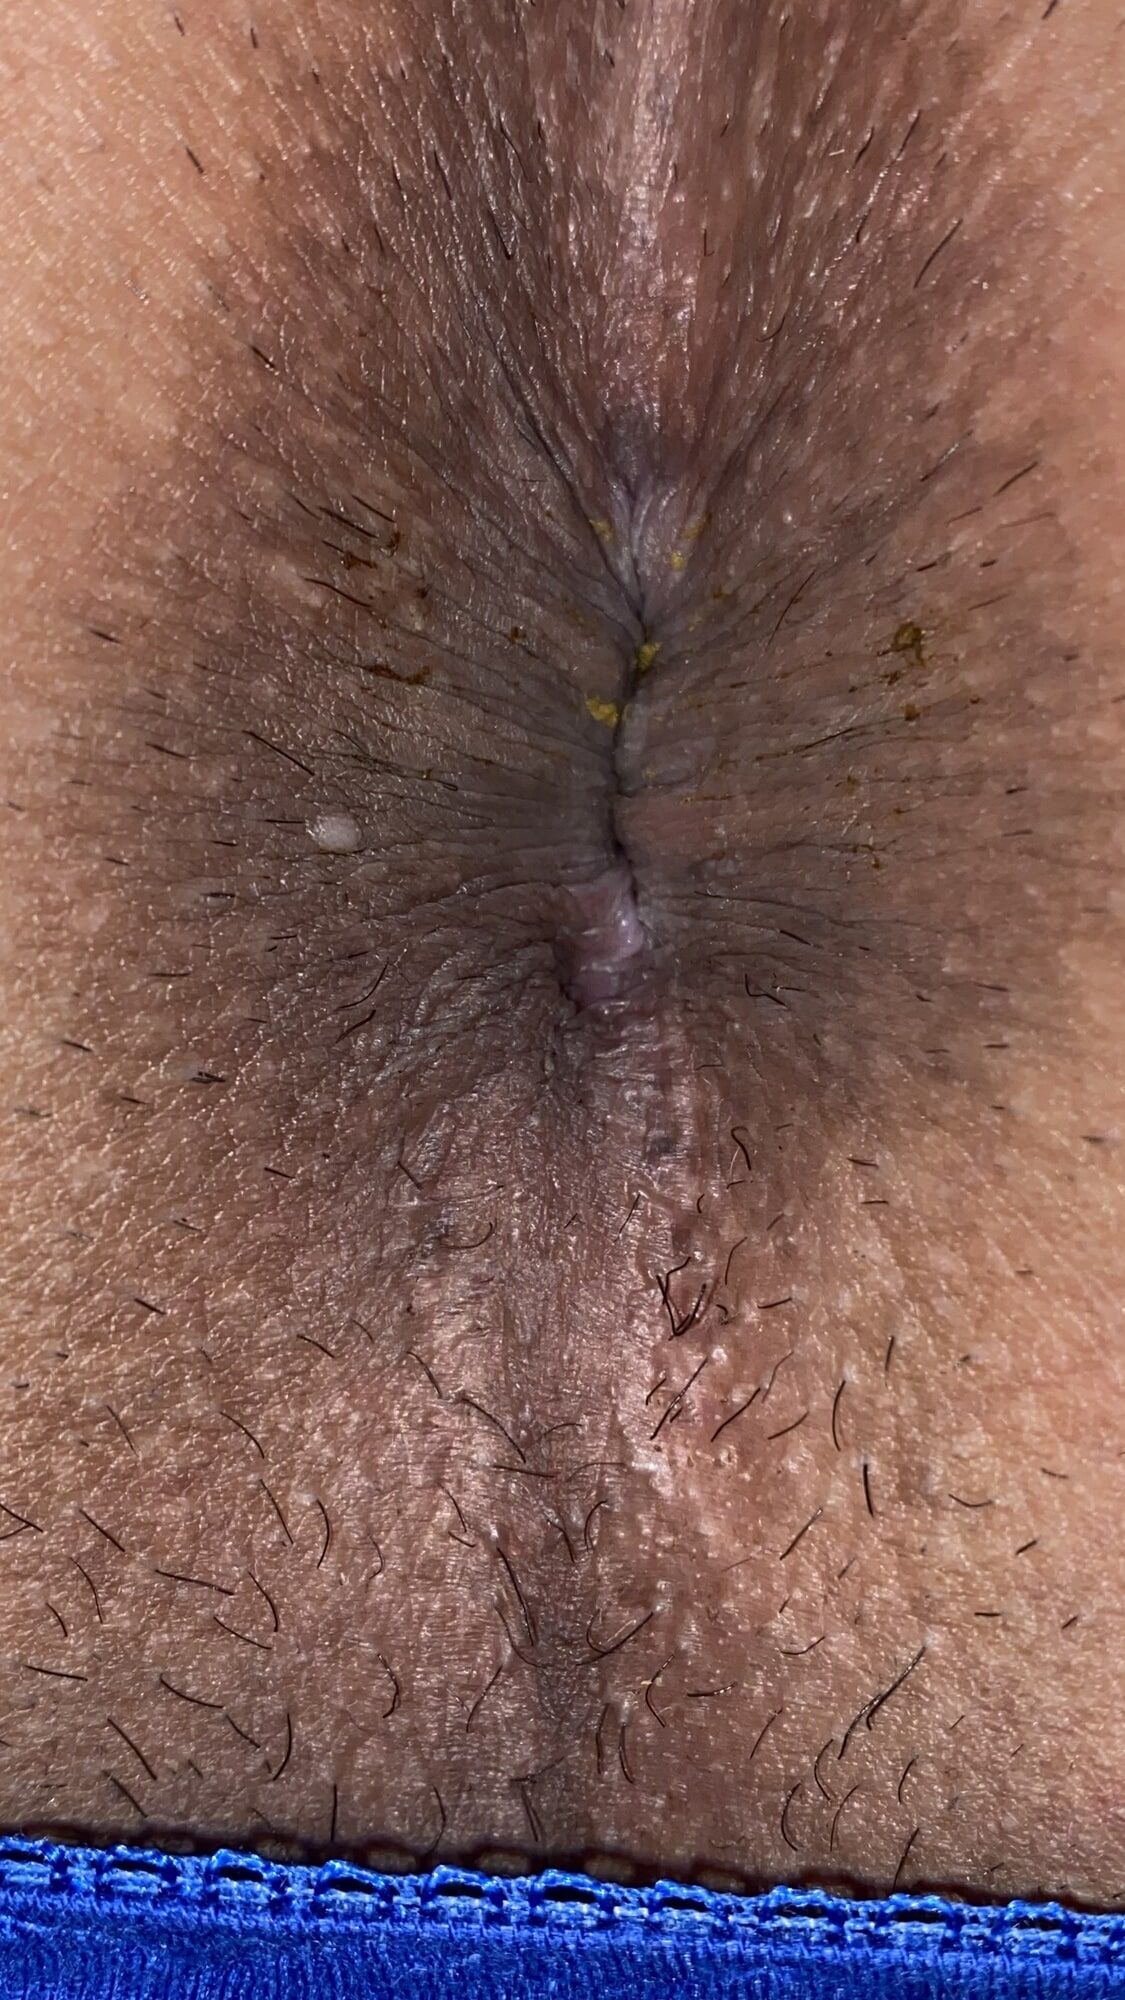 An image of my anus that is clear to every single wrinkle #13